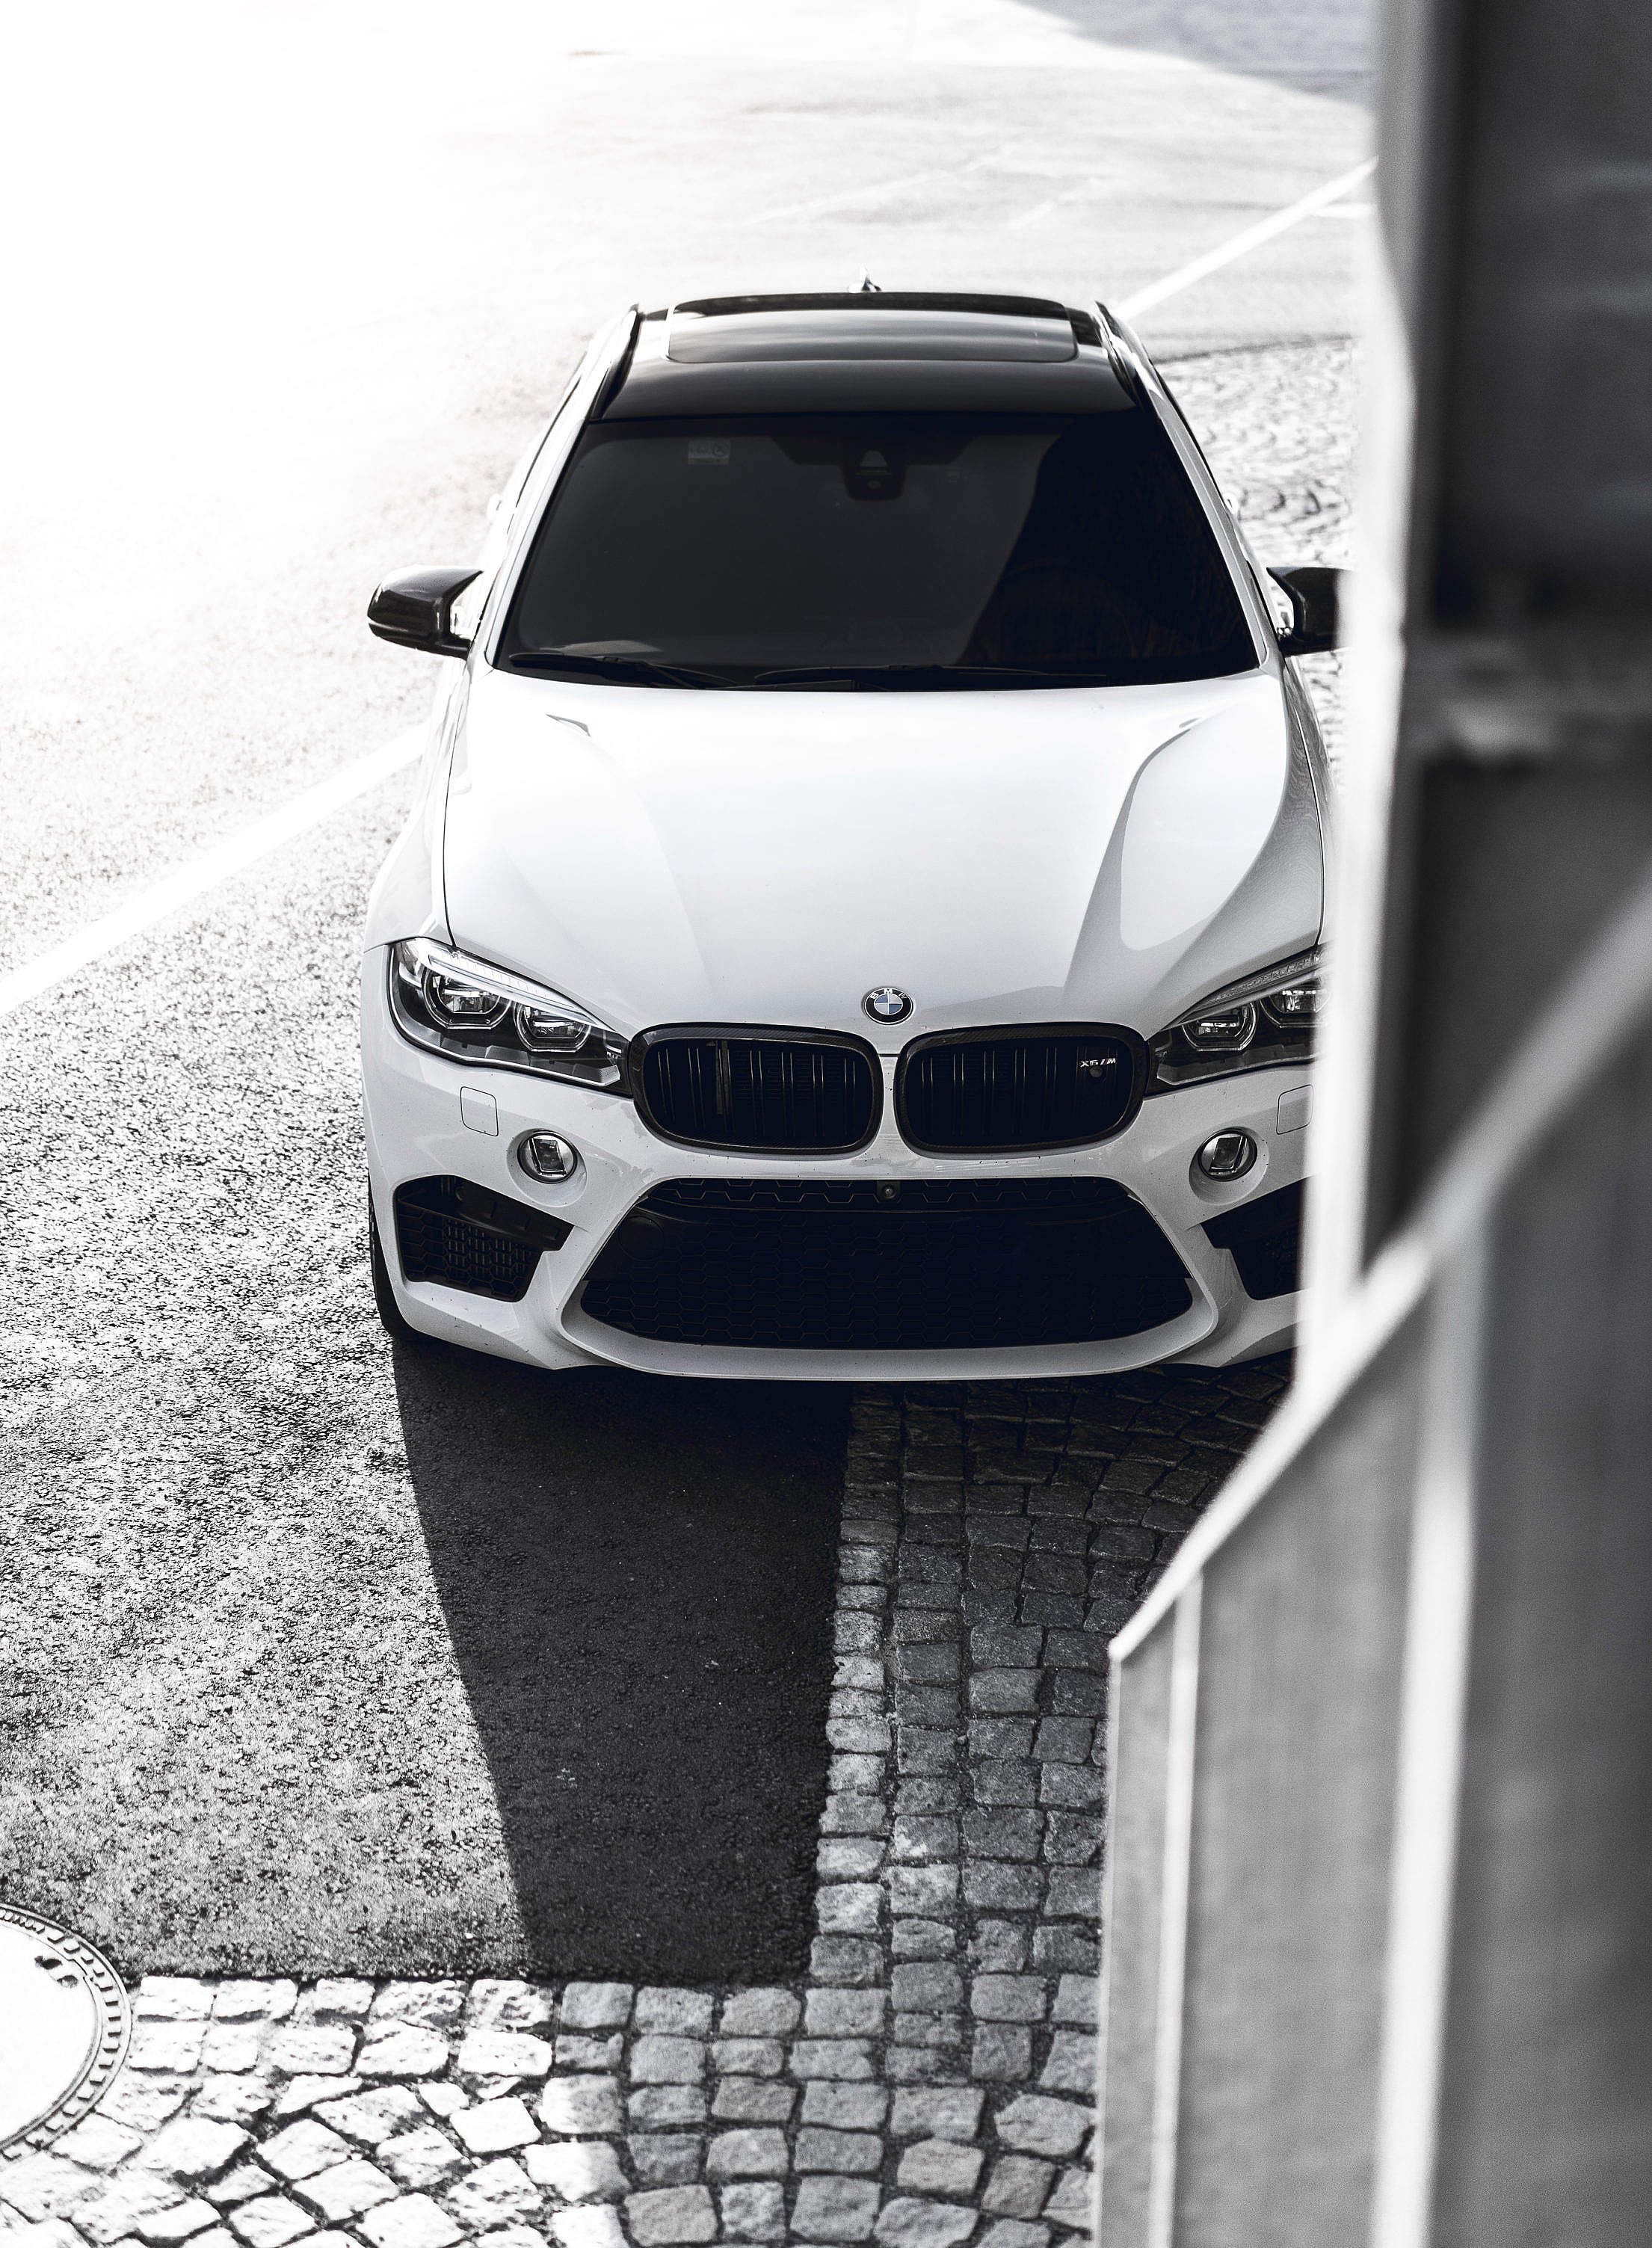 Bmw Iphone Wallpapers 4k Hd Bmw Iphone Backgrounds On Wallpaperbat